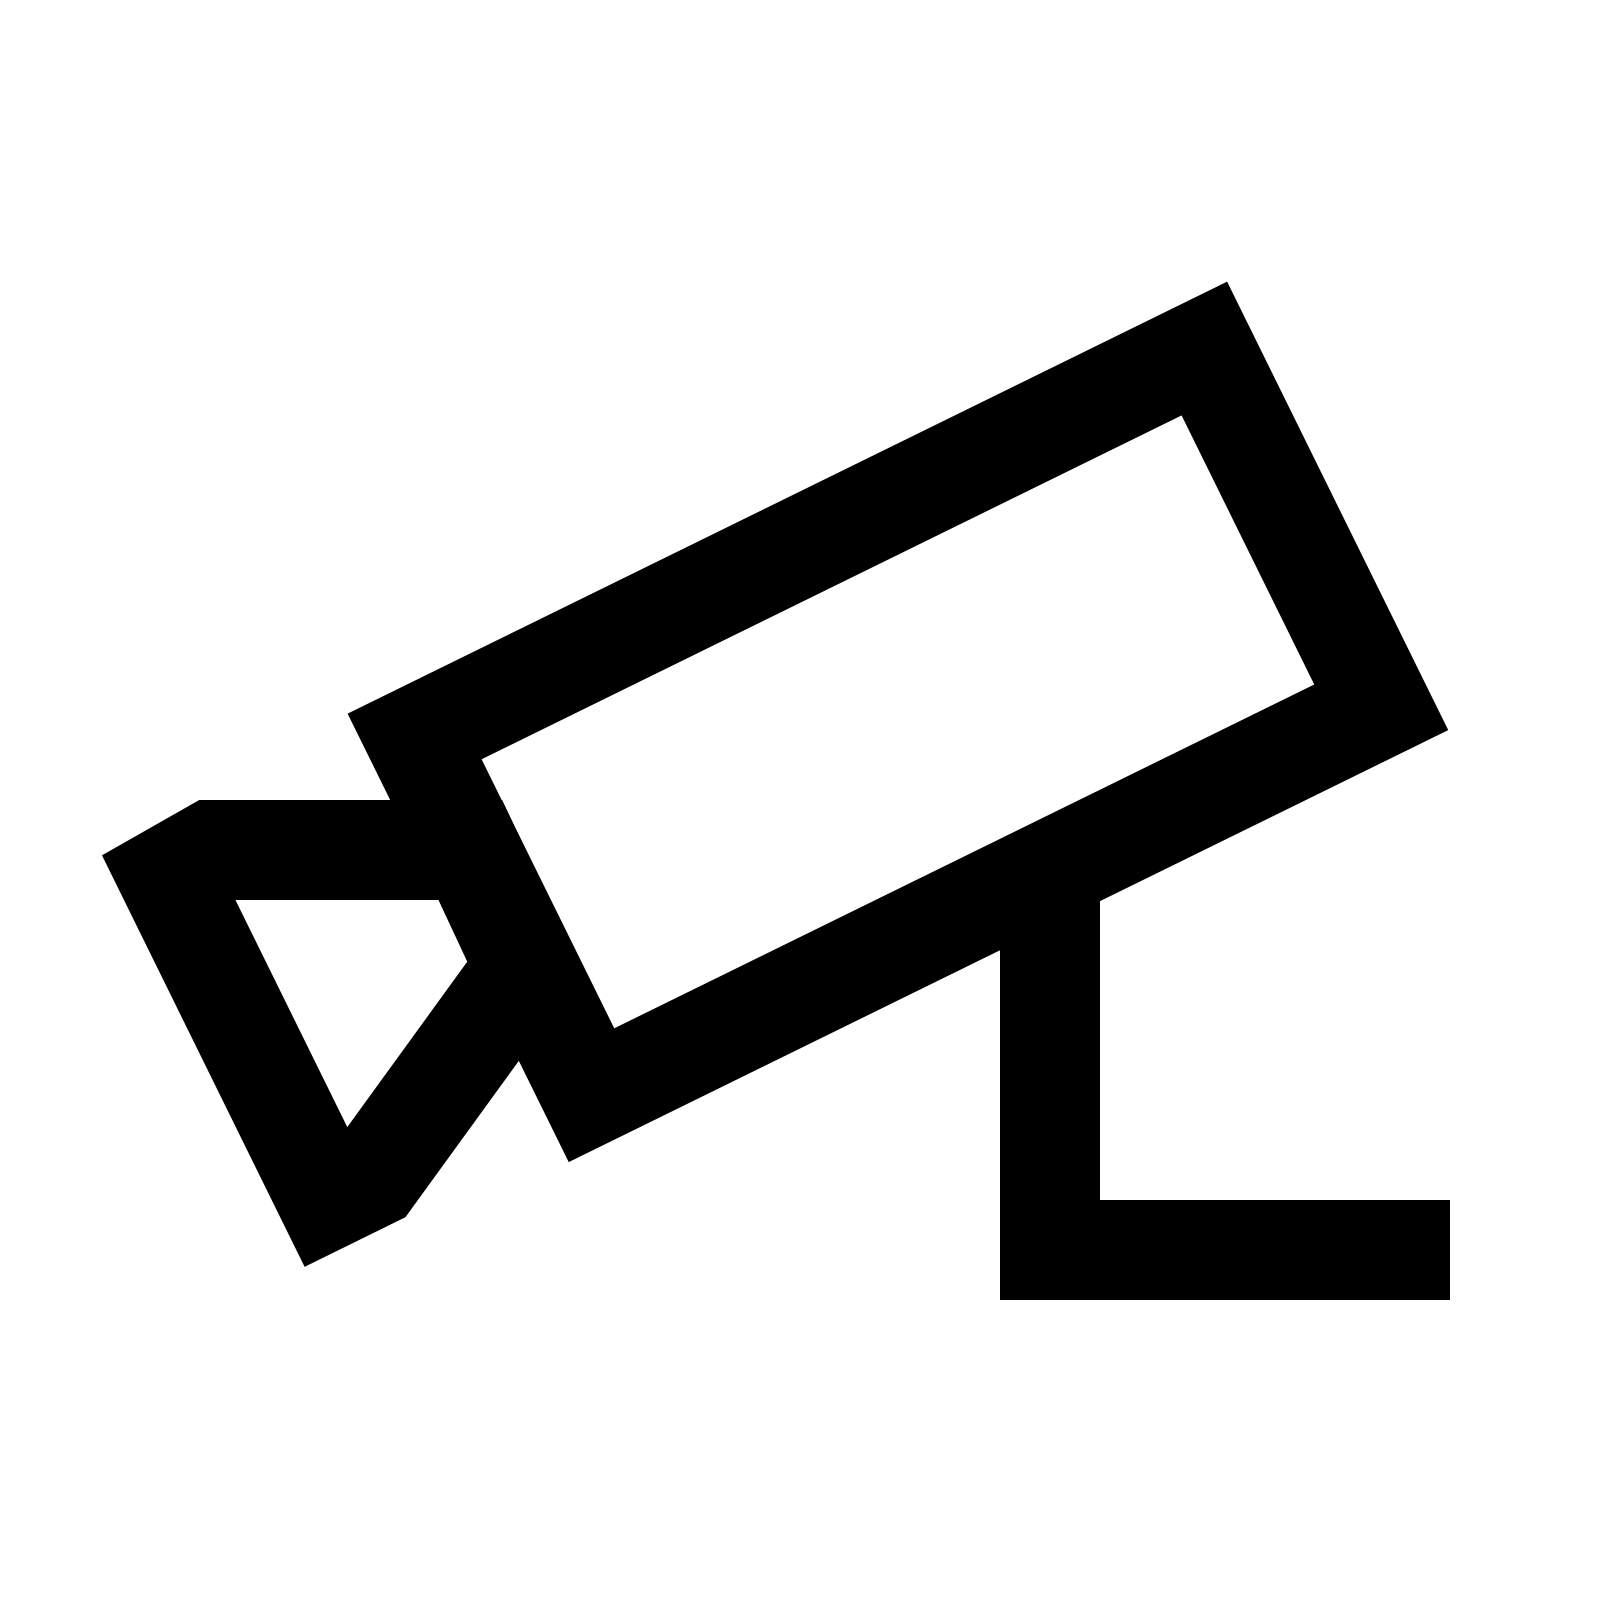 Wall Mount Camera Icon - free download, PNG and vector